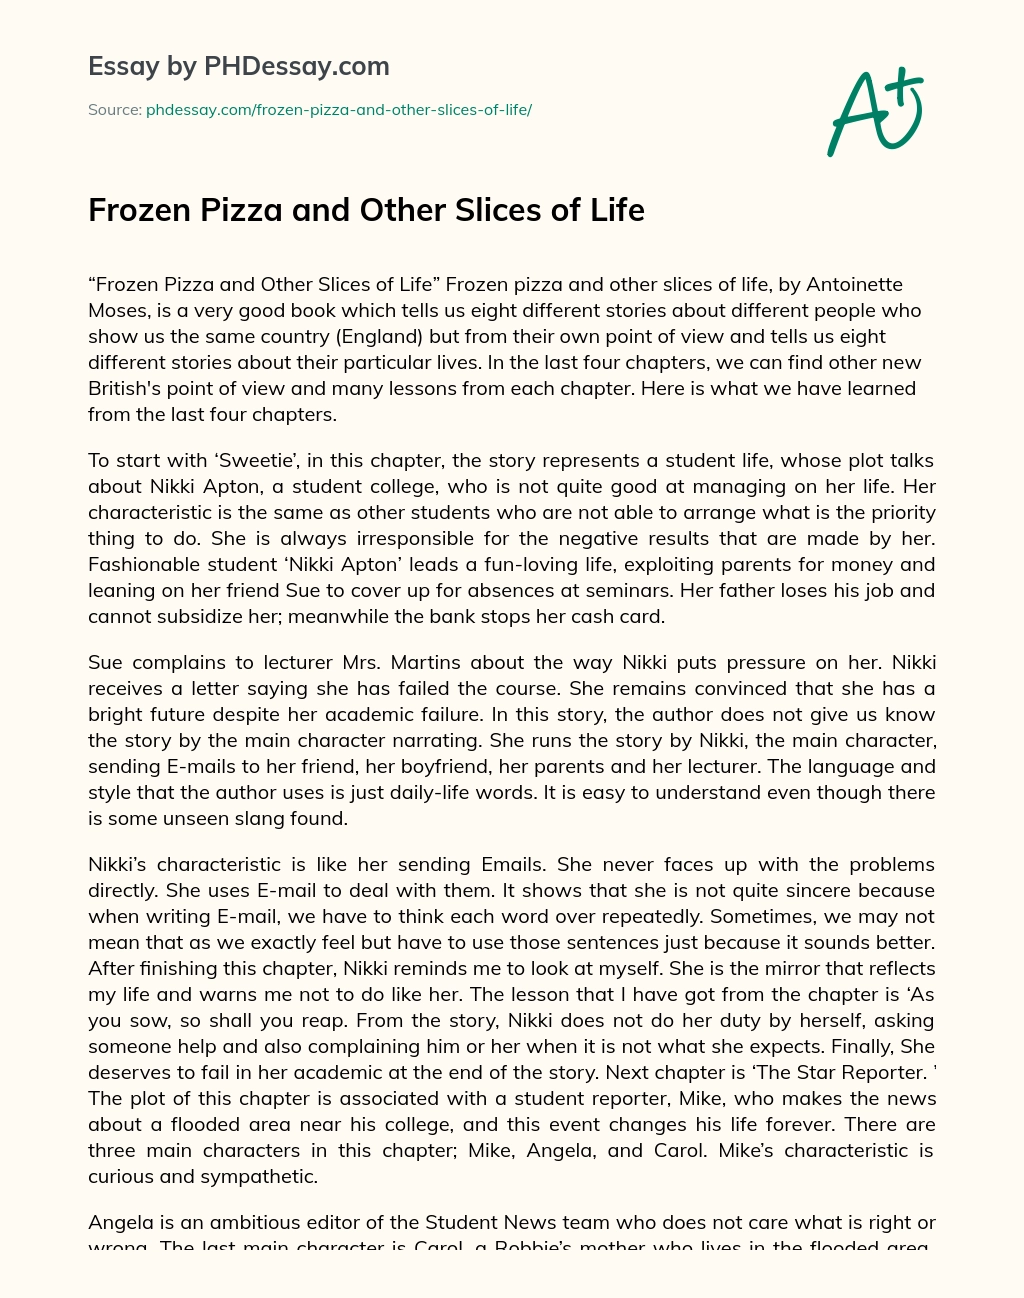 Frozen Pizza and Other Slices of Life essay